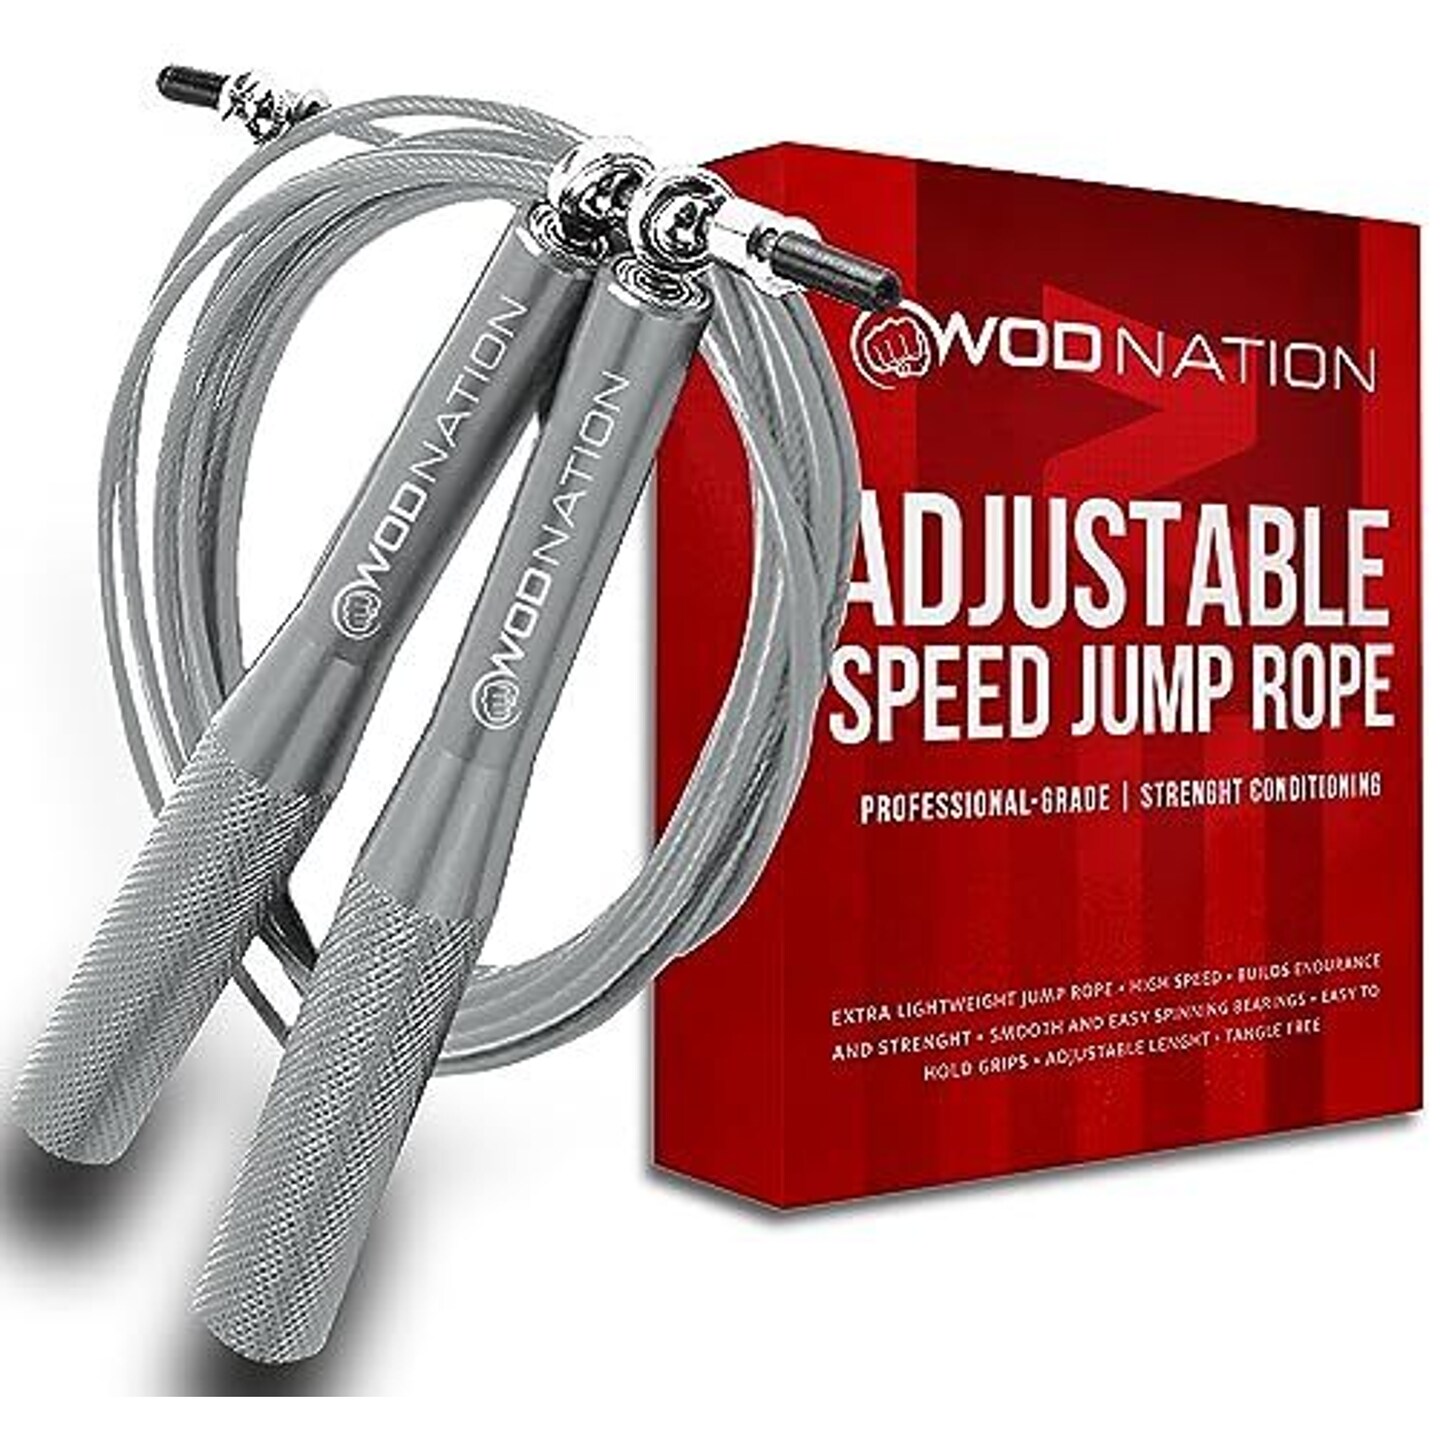 WOD Nation Aluminum Handle High Speed Adjustable Jump Rope for Women and Men - Perfect Skipping Rope for Boxing, Fitness, Workout - Gray